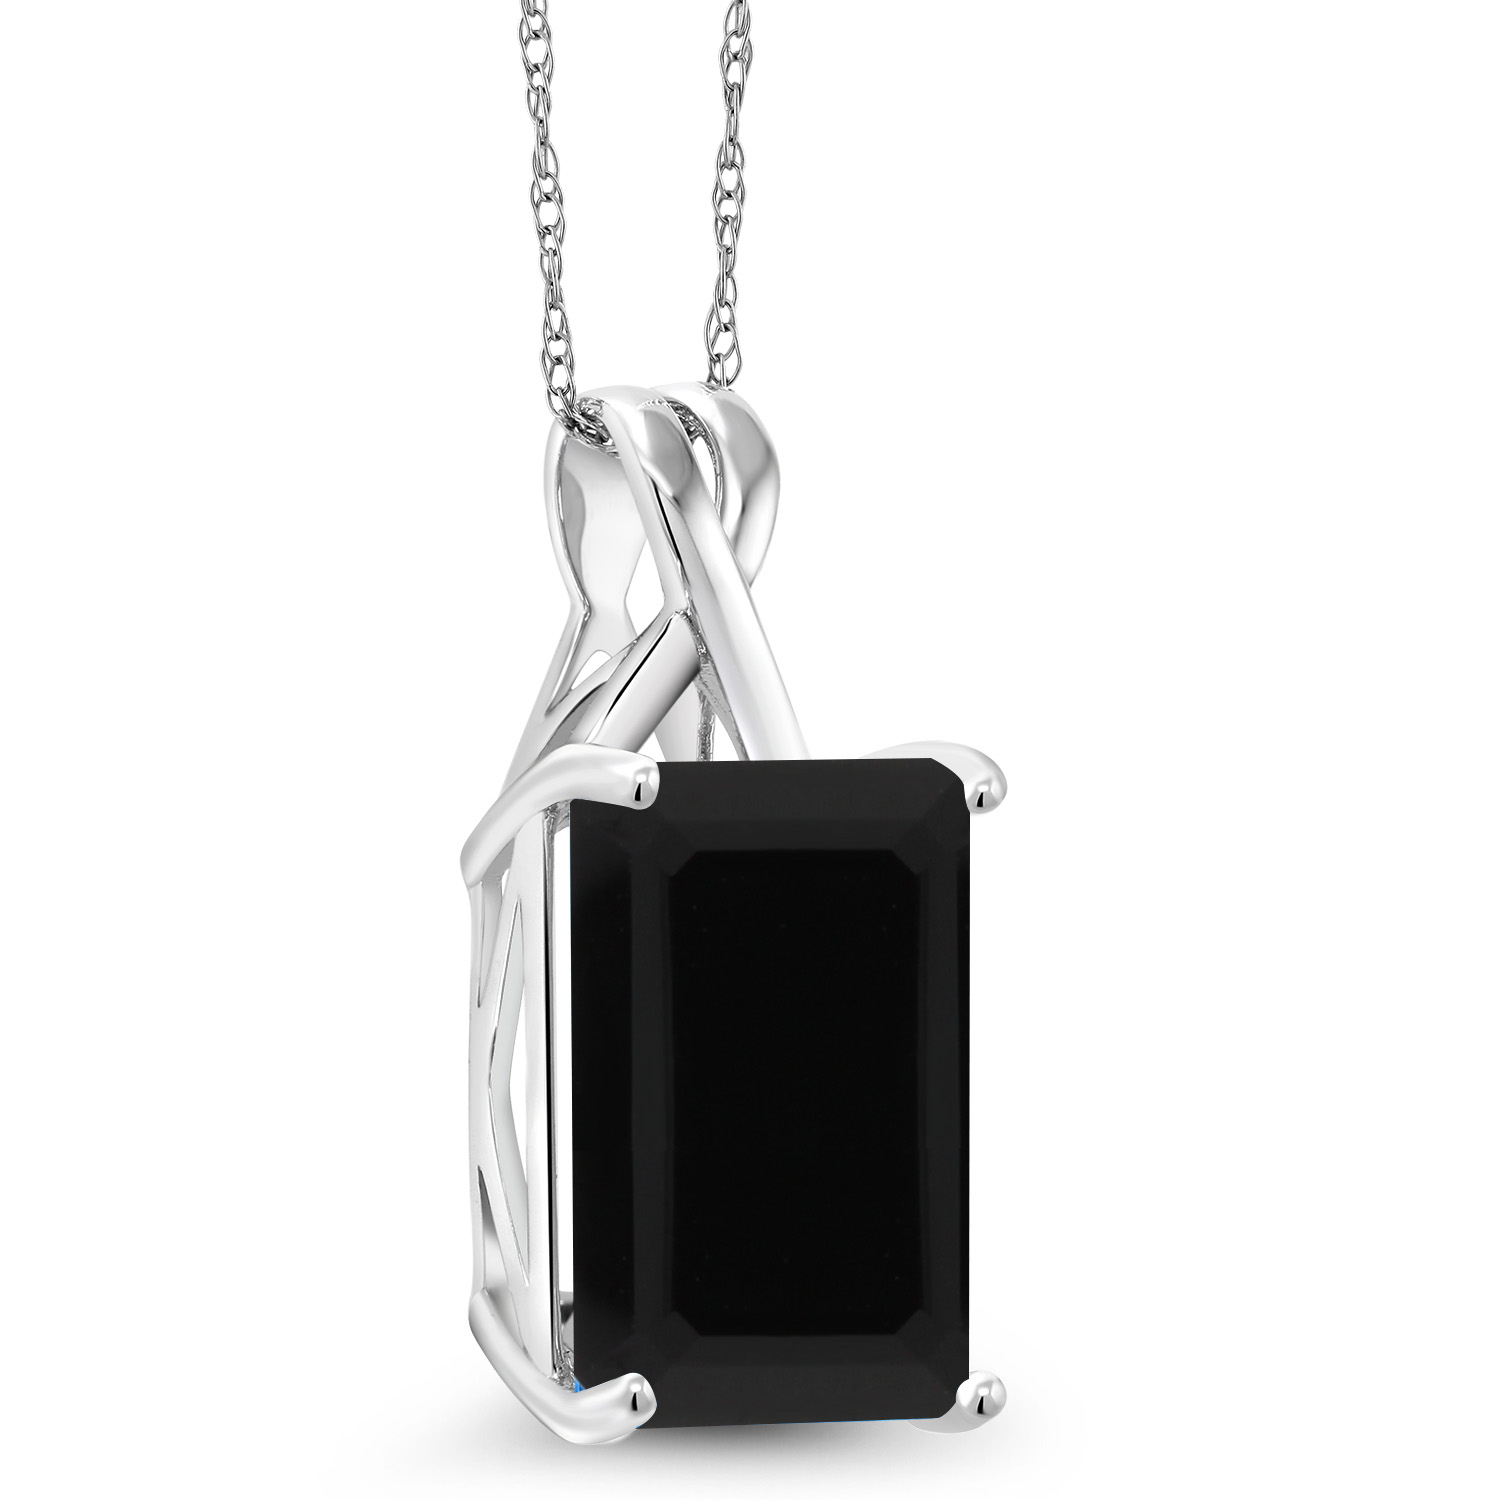 Gem Stone King 10K White Gold Black Onyx Pendant Necklace For Women (5.00 Cttw, Gemstone Birthstone, 14X10MM Emerald Cut with 18 Inch Chain)